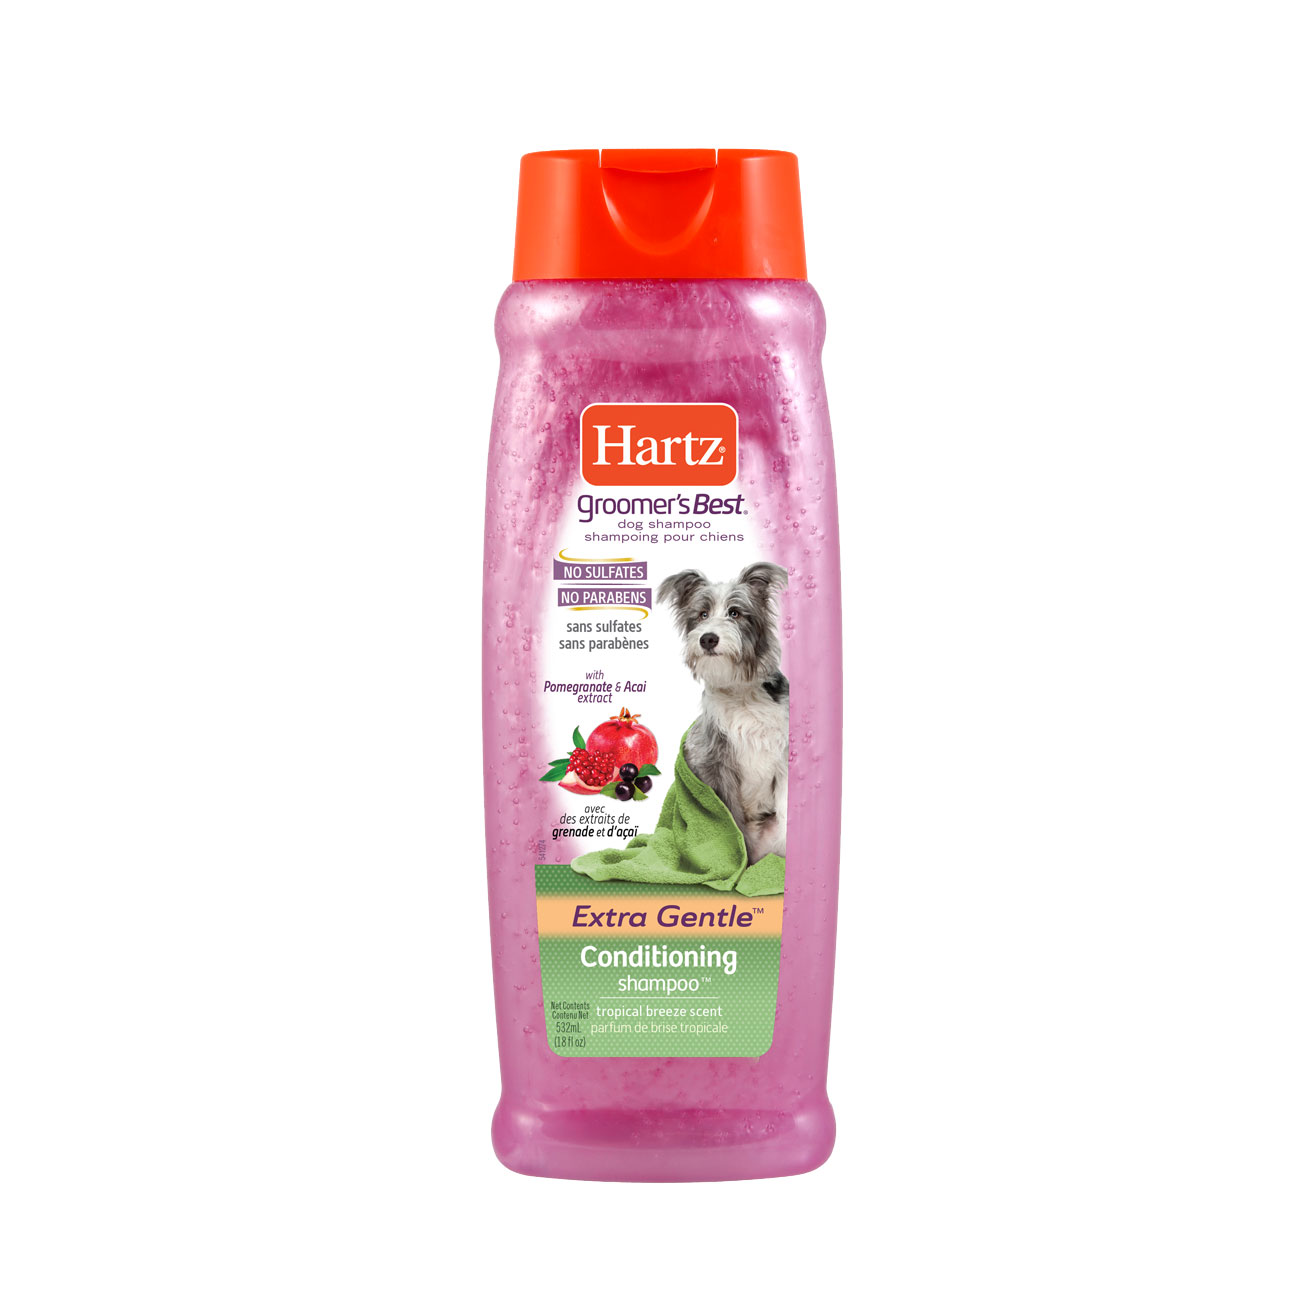 Hartz groomers best conditioning shampoo for dogs. Hartz sku#3270095068. Shampoo for dogs and dog bath.